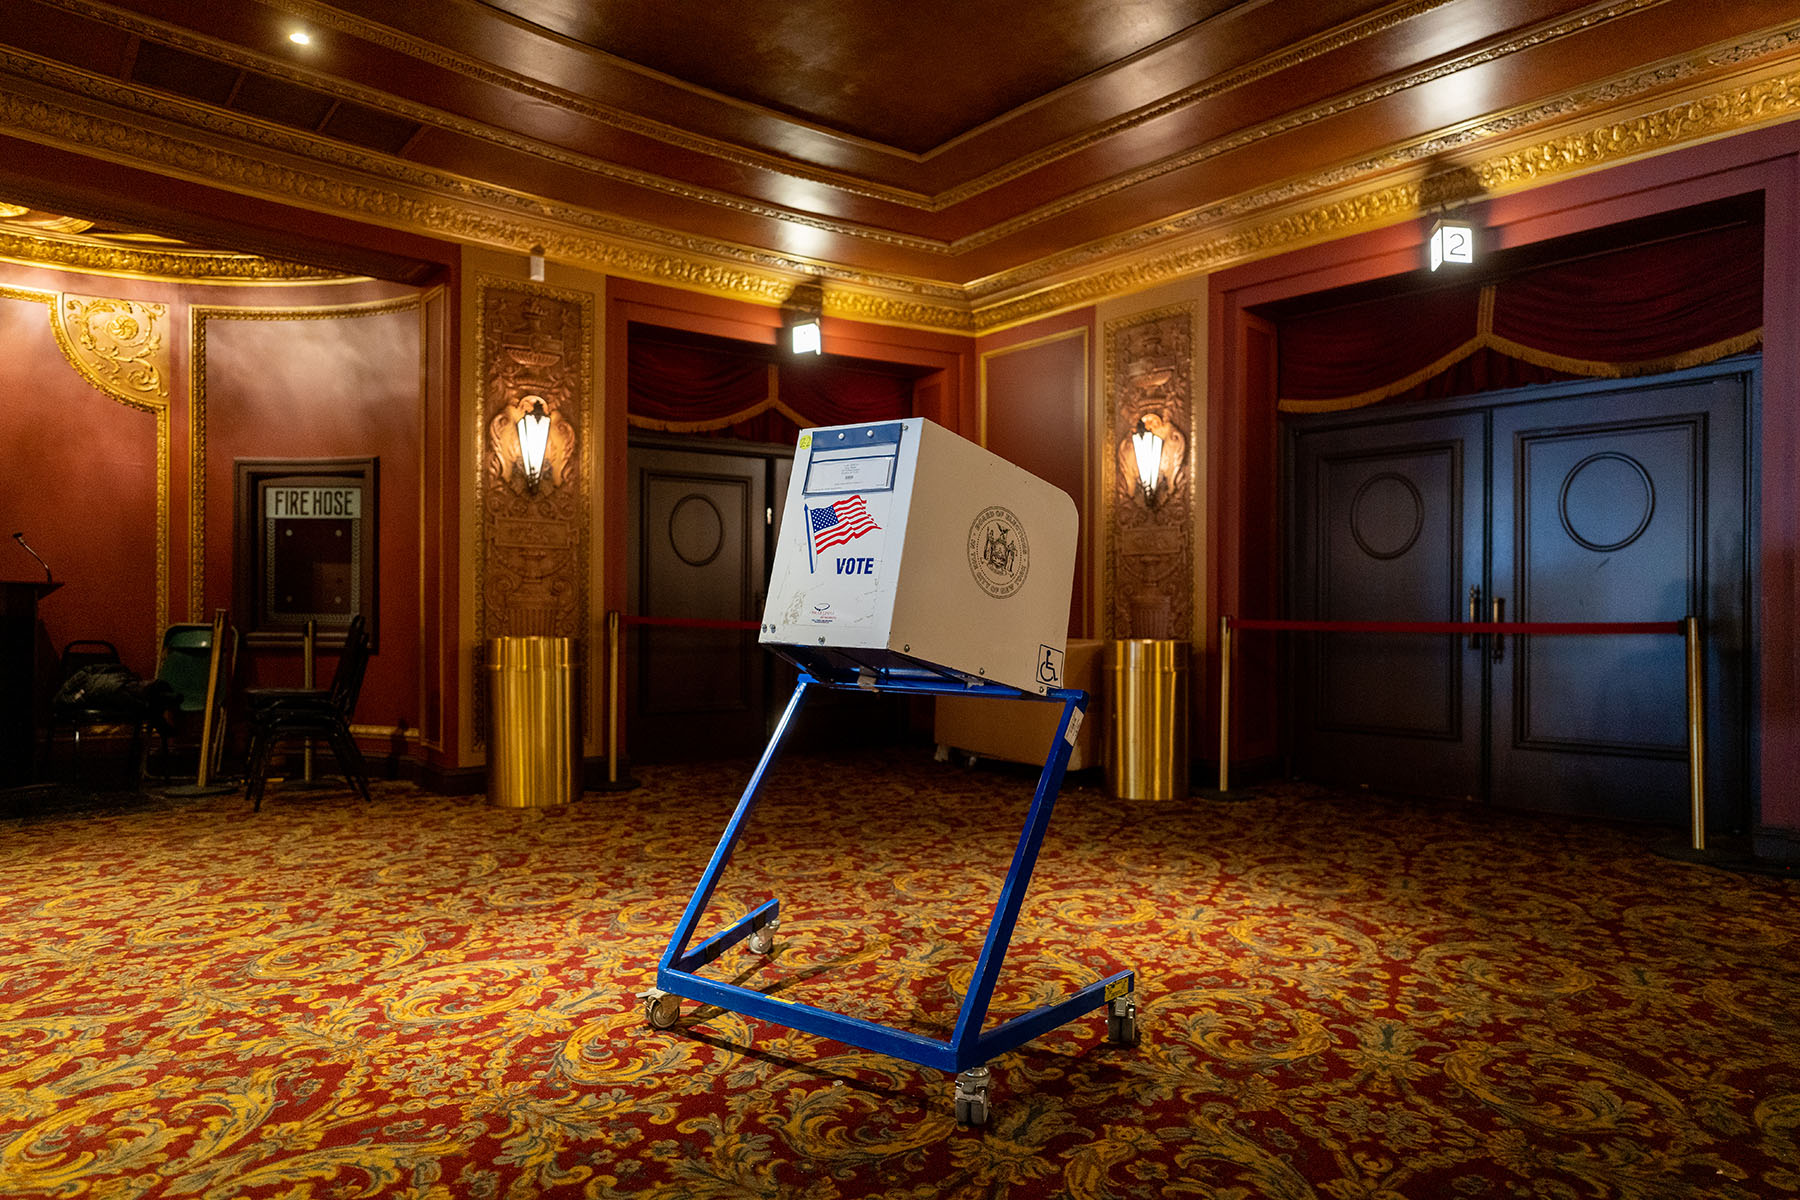 A voting booth sits empty at kings theater in the Brooklyn borough of New York City.